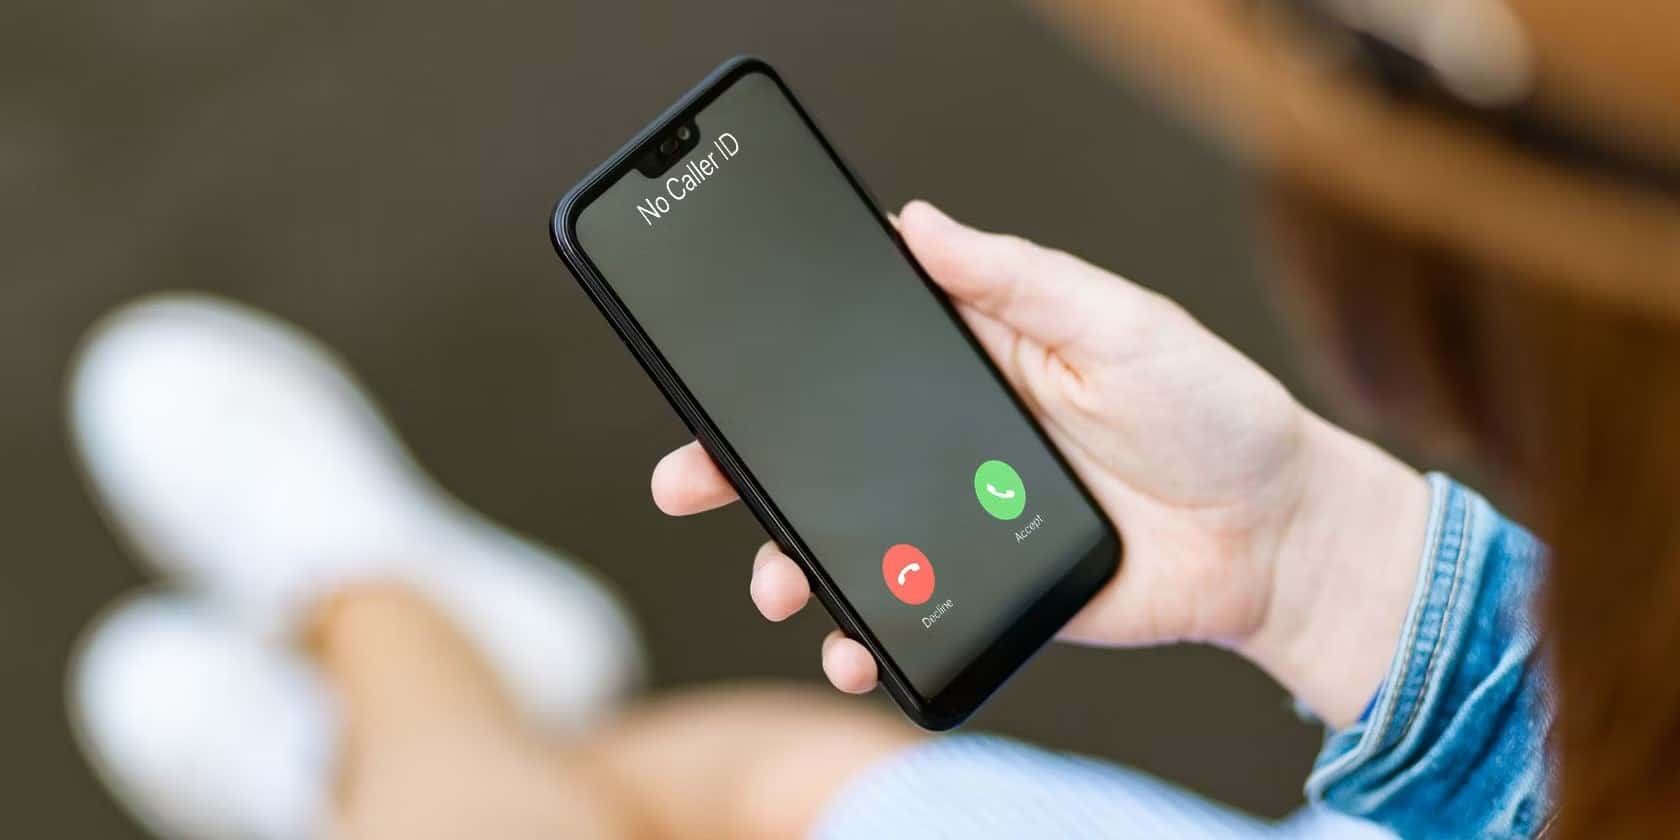 Hide Your Caller ID Before Dialing